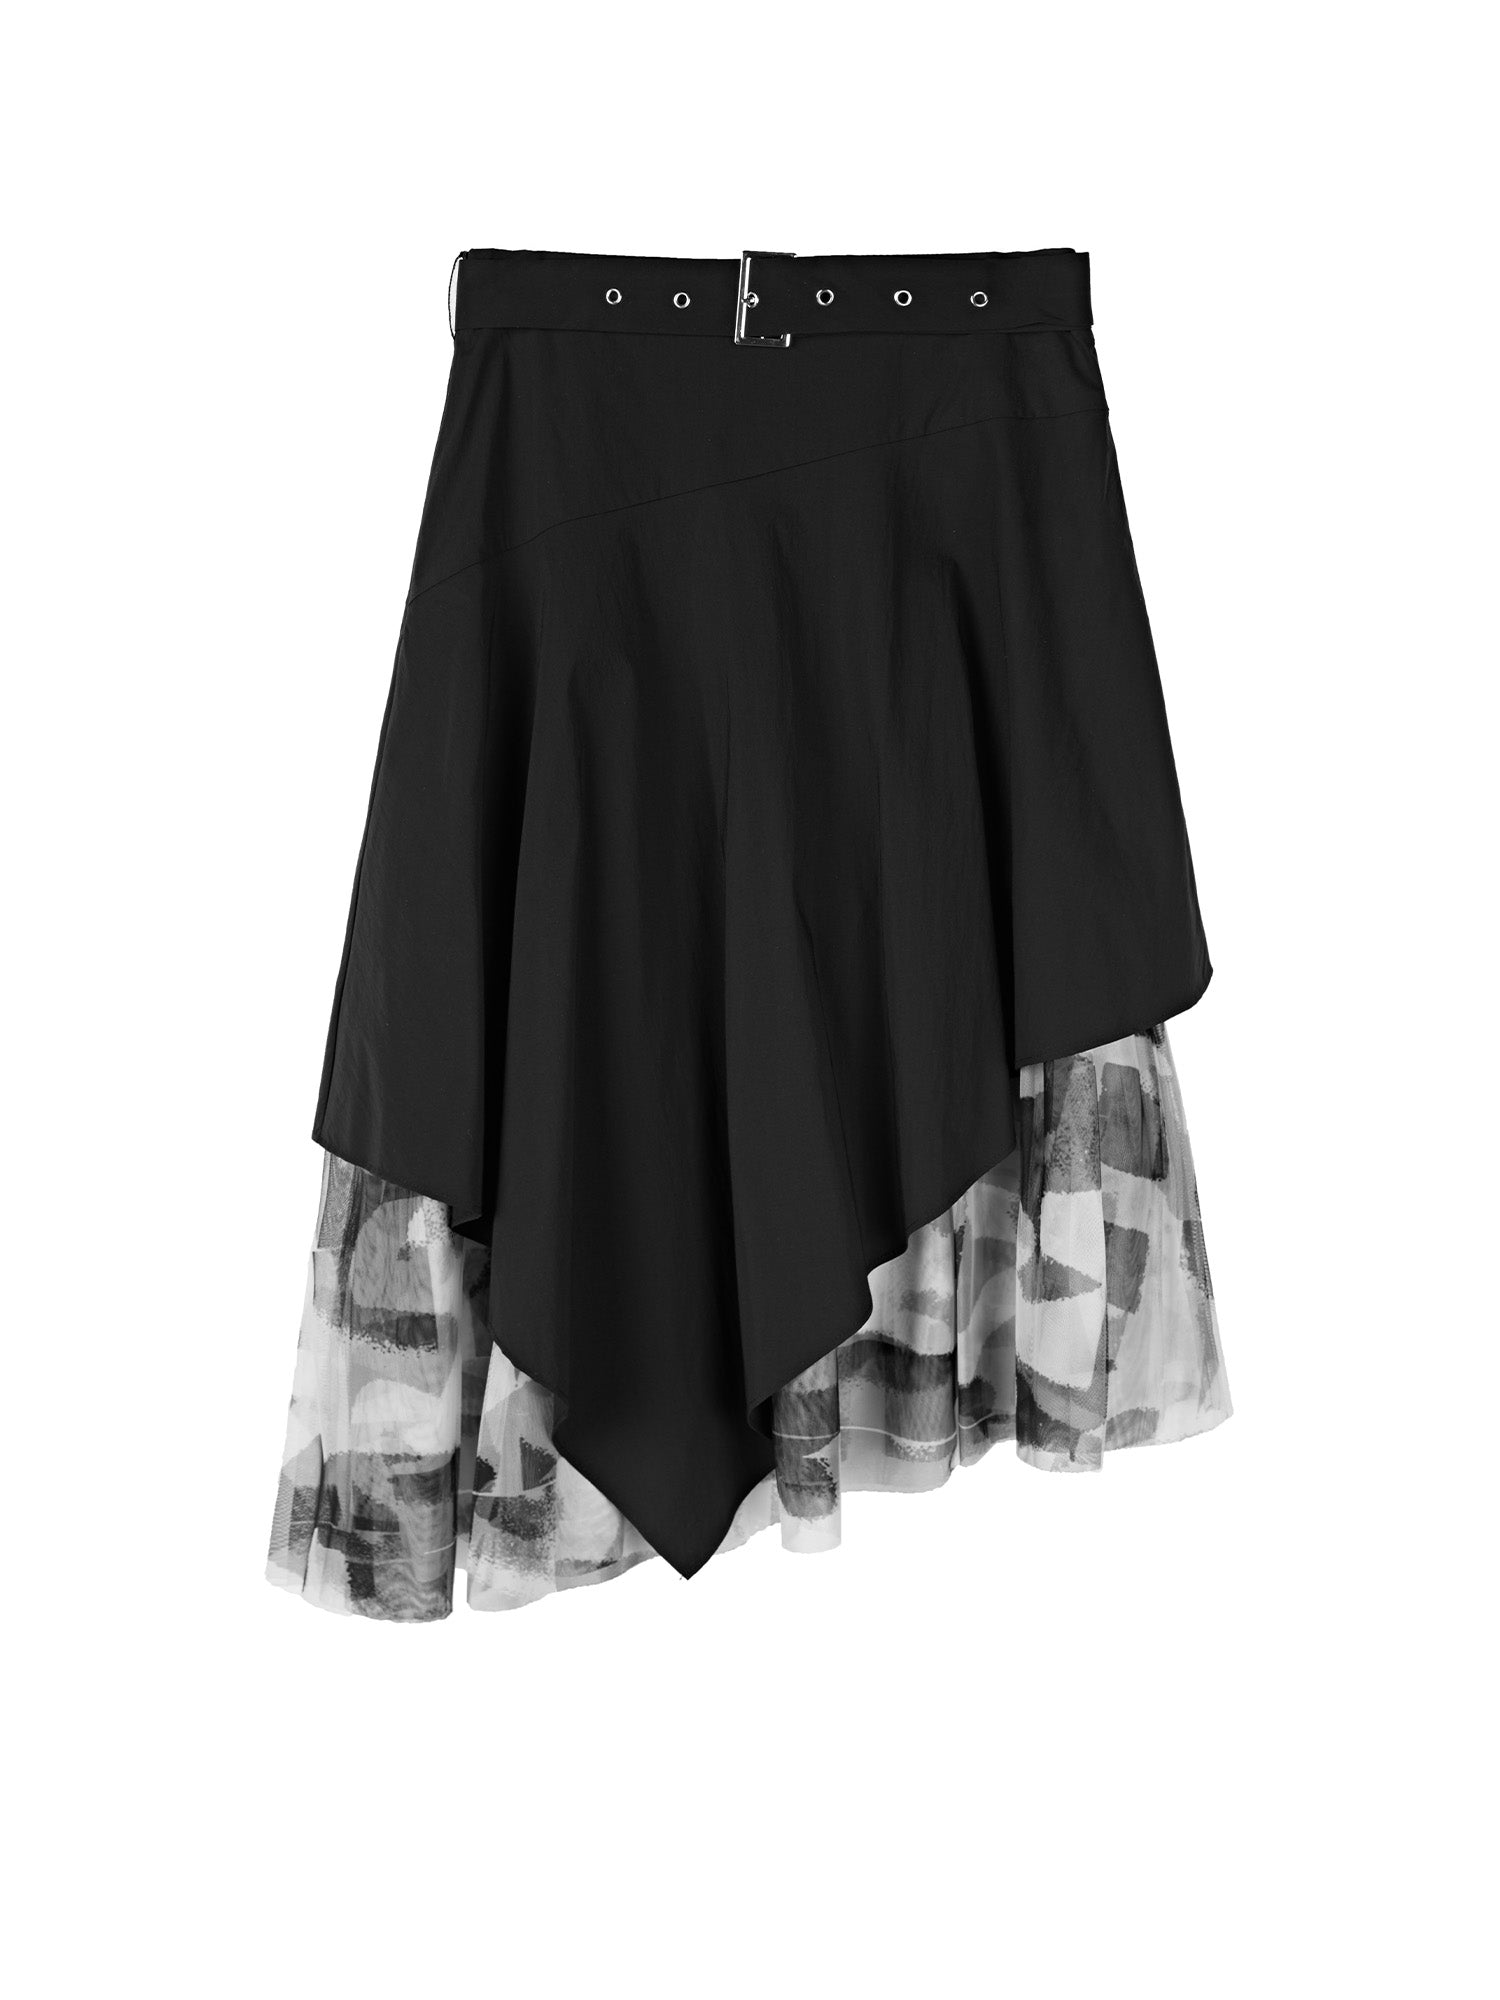 The unique design of the long skirt adds a touch of personality to women&#39;s outfits